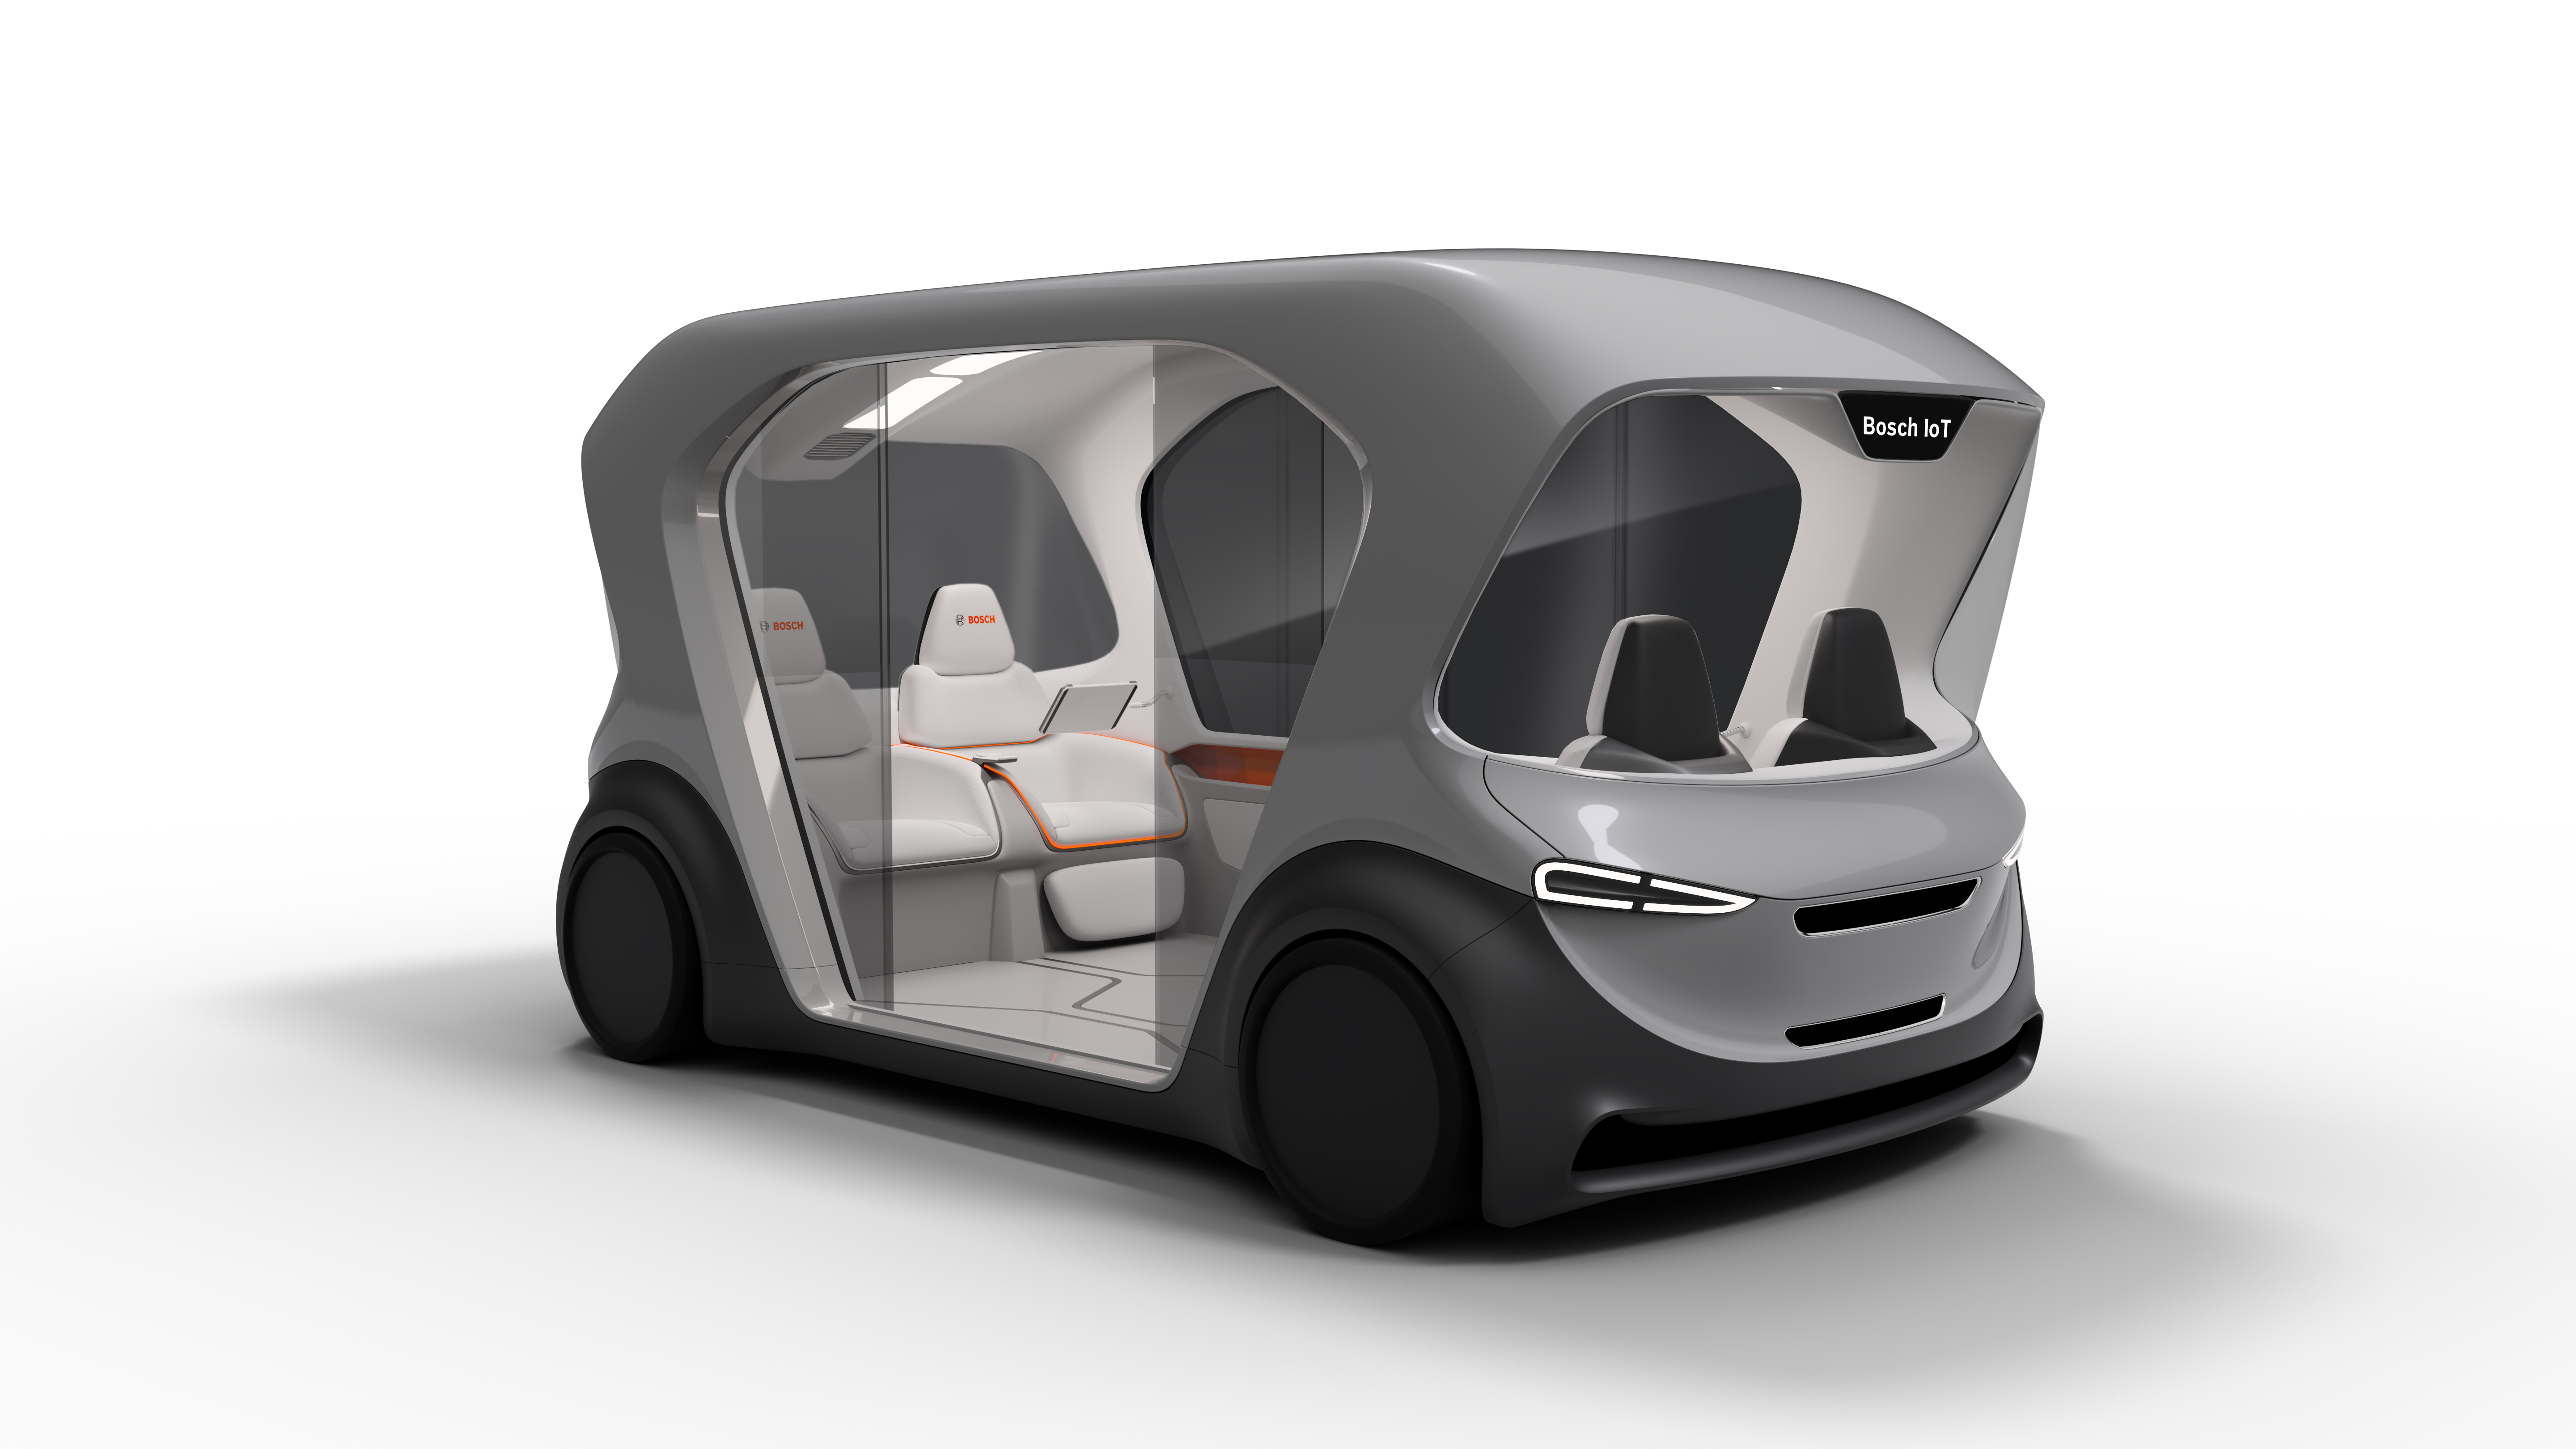 Debut of Bosch's new concept shuttle at CES 2019 in Las Vegas